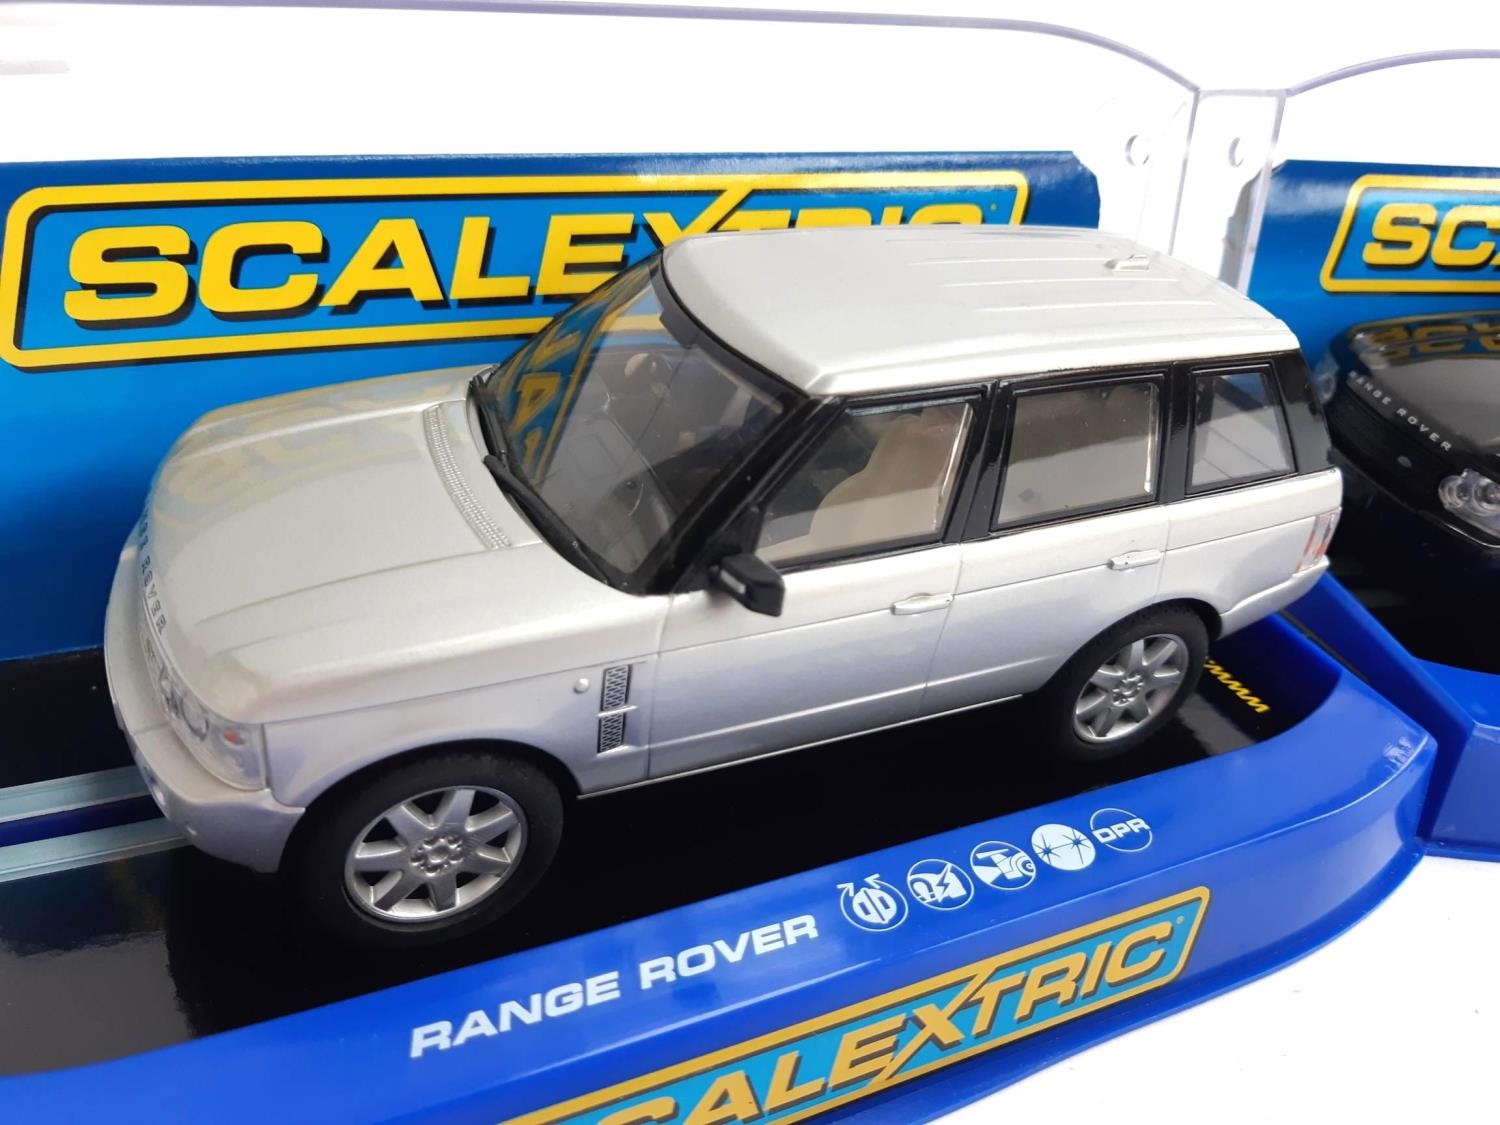 A Scalextric Range Rover 'Street Car', boxed, together with a Range Rover 'Black', boxed - Image 2 of 3